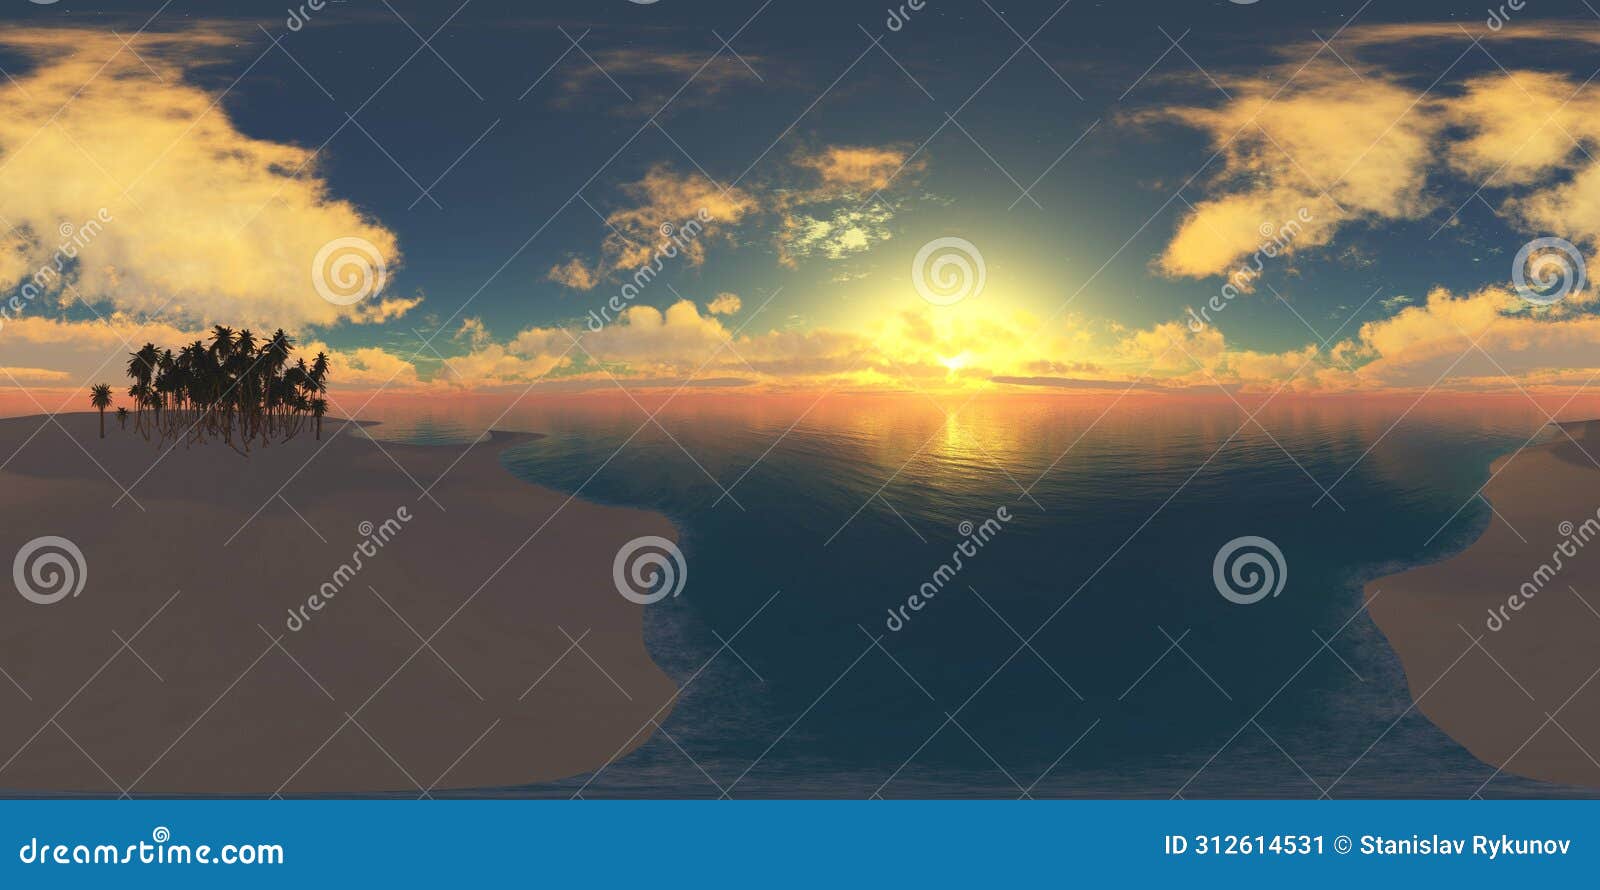 environment map, round panorama, spherical panorama, equidistant projection, sea sunset